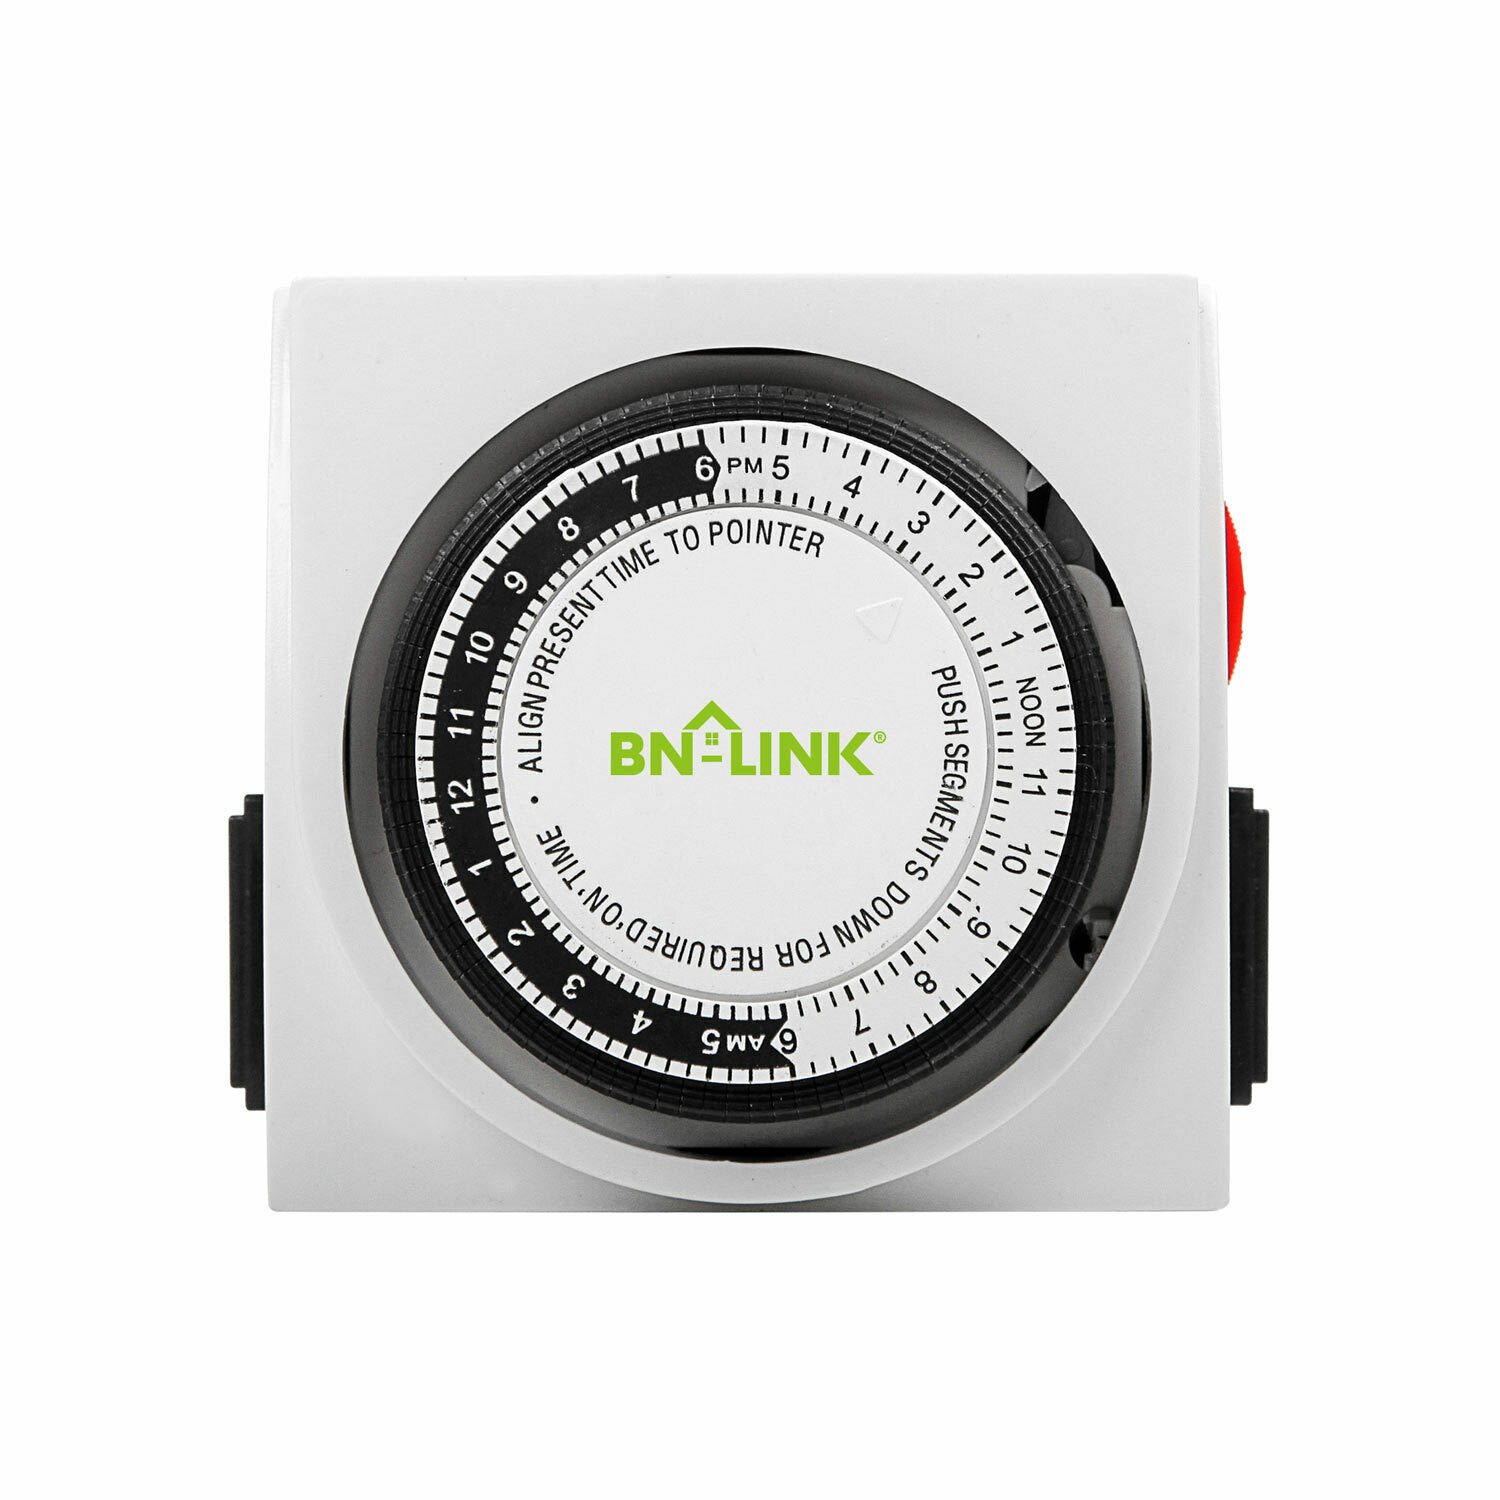 Bn-link Dual Outlet 15 Minutes To 24 Hour Heavy Duty Mechanical Timer